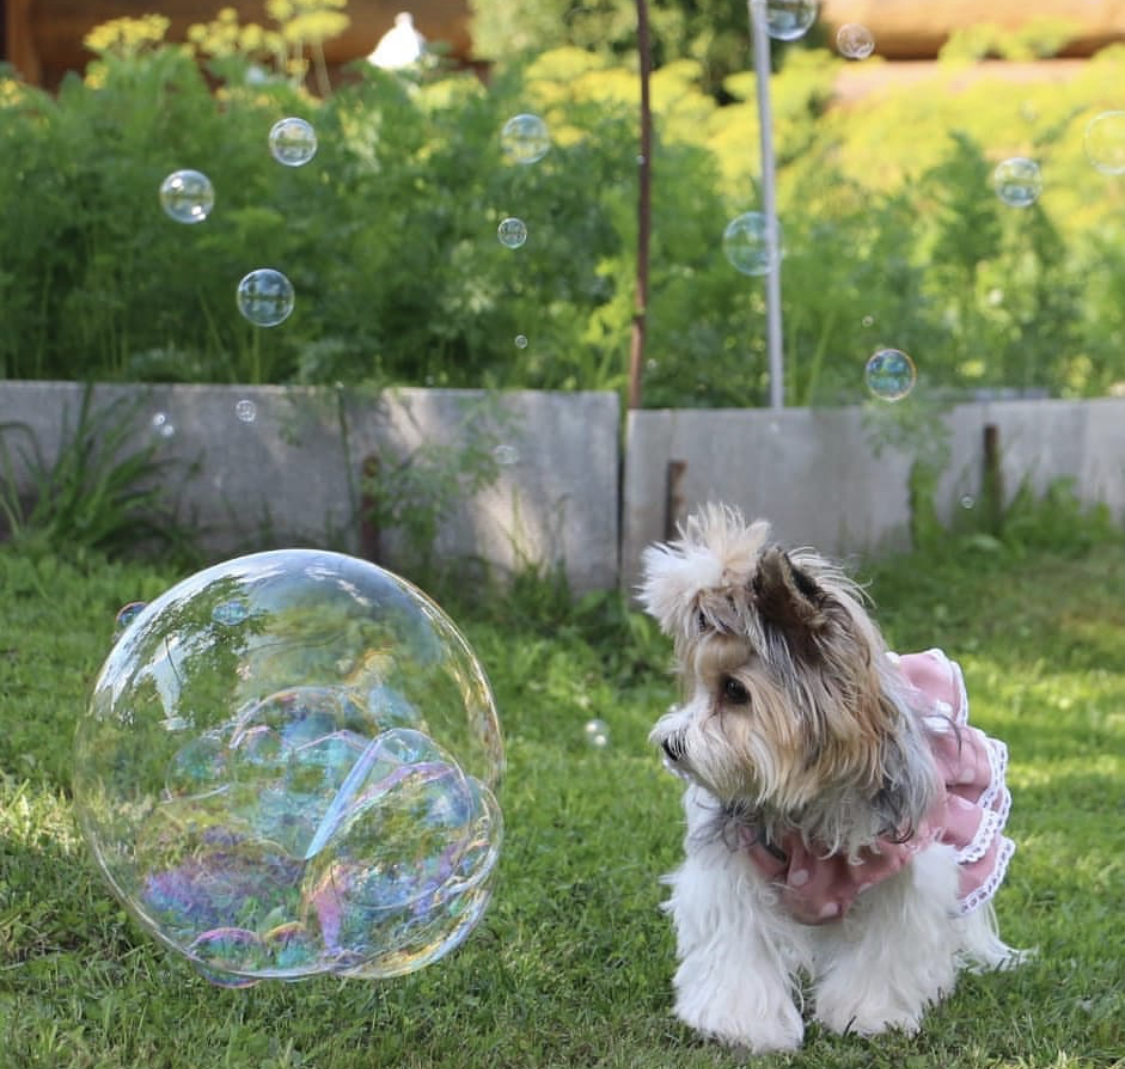 Yorkshire Terrier standing in the green grass while looking at the big bubble next to her